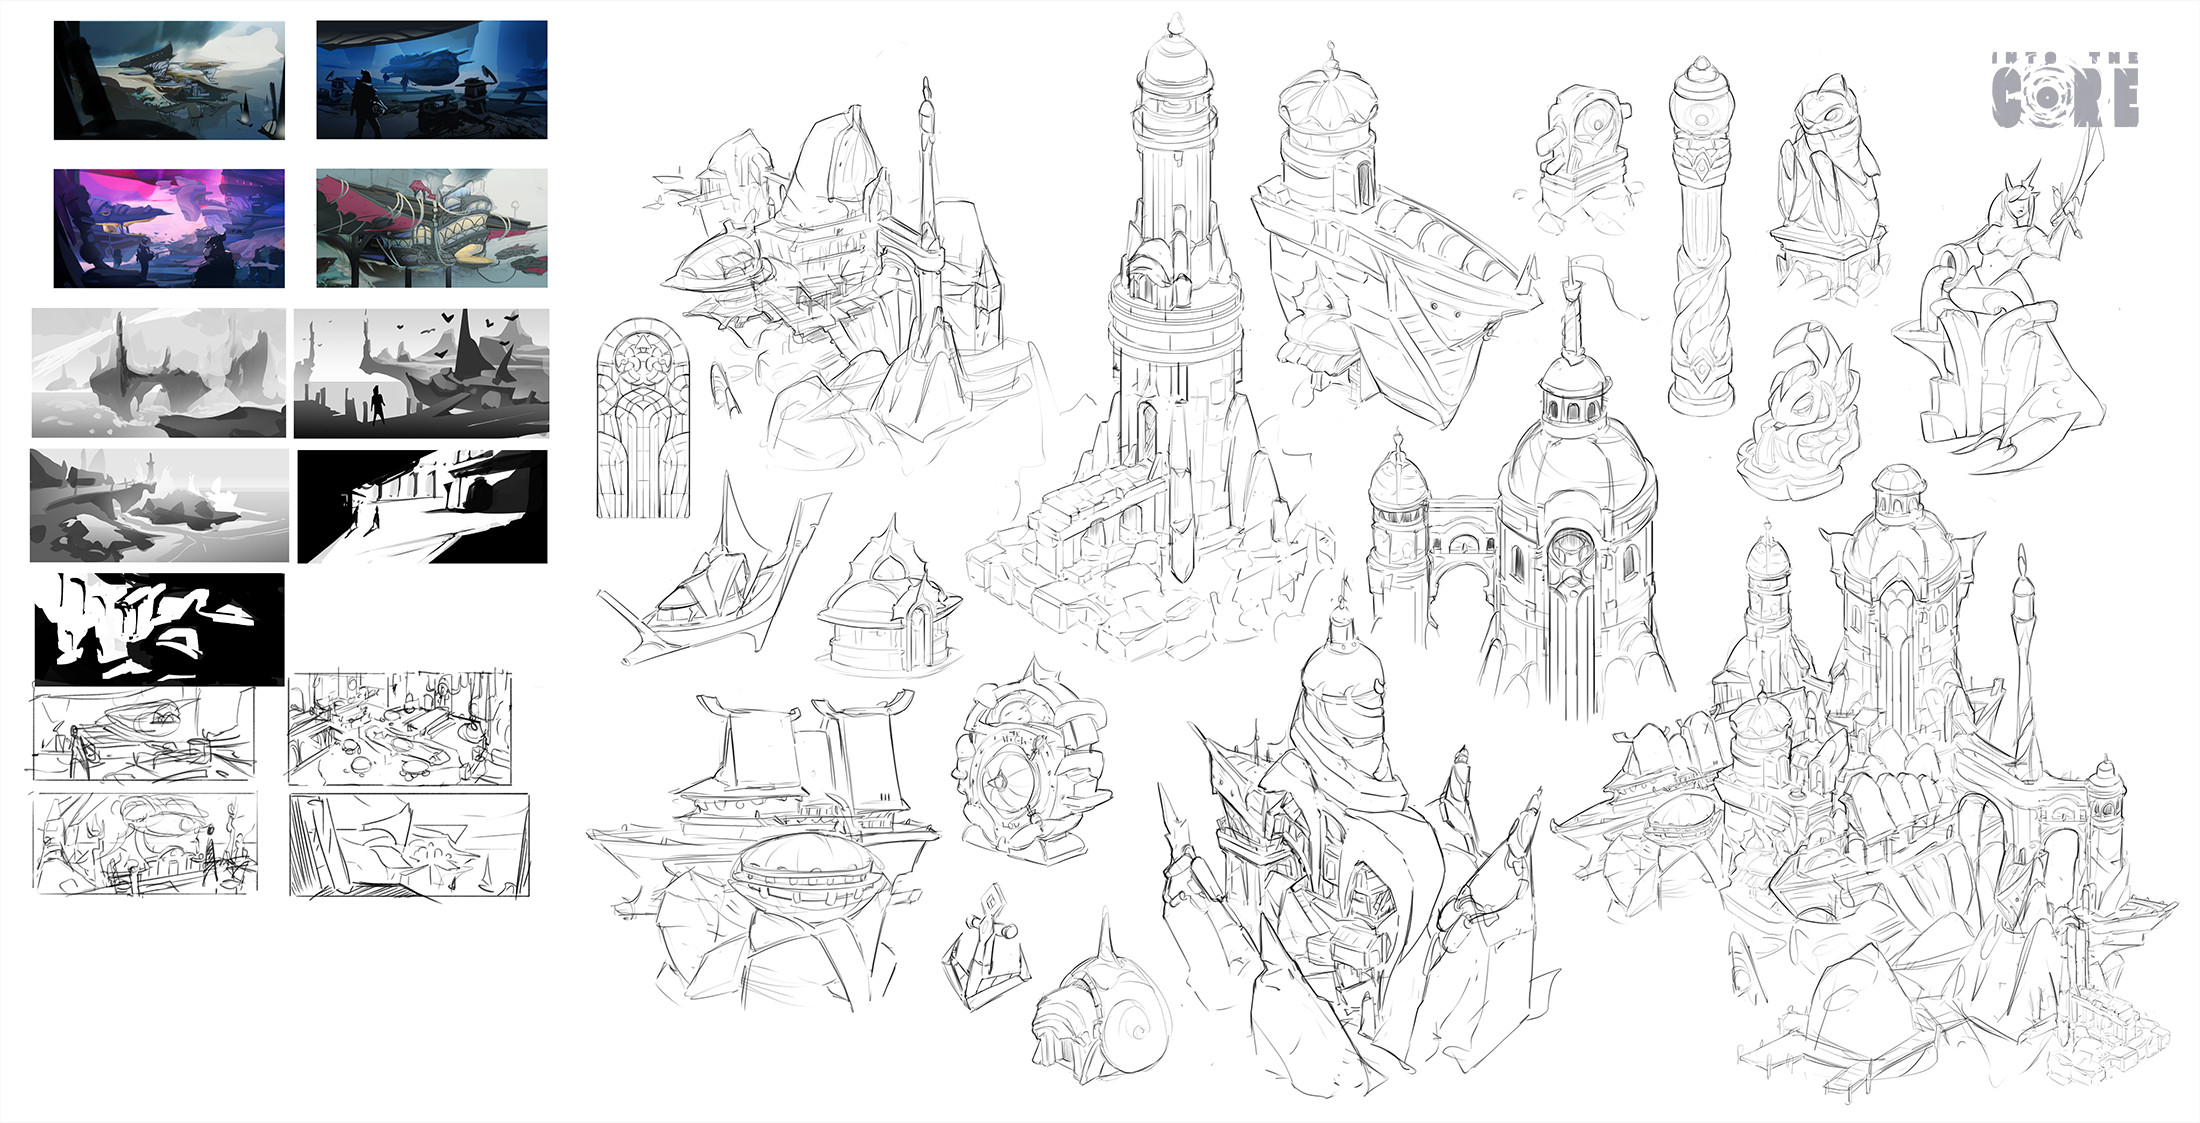 Initial sketches to get a feel of the setting